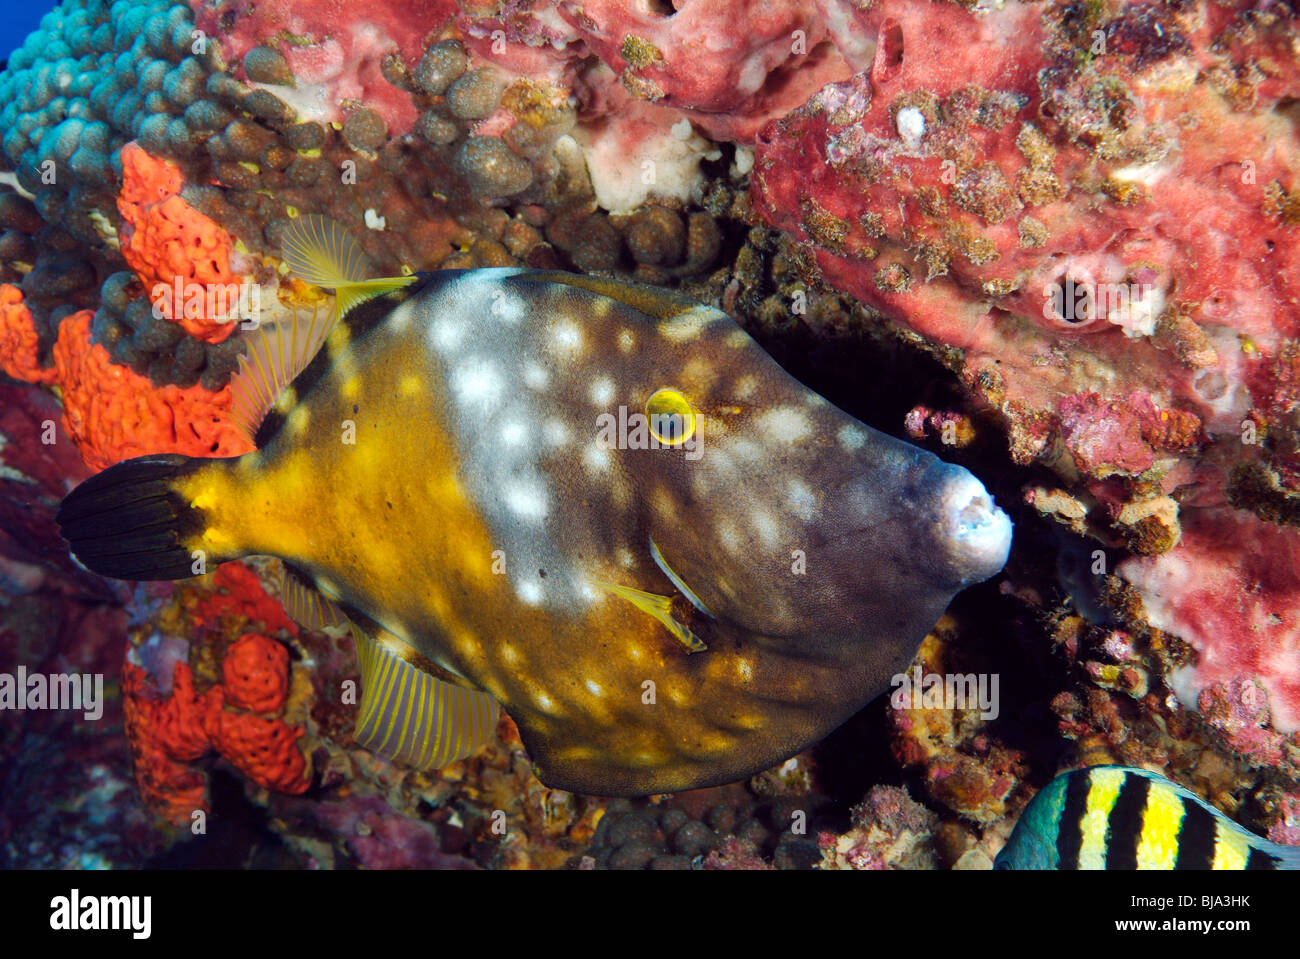 Whitespotted filefish in the Gulf of Mexico Stock Photo